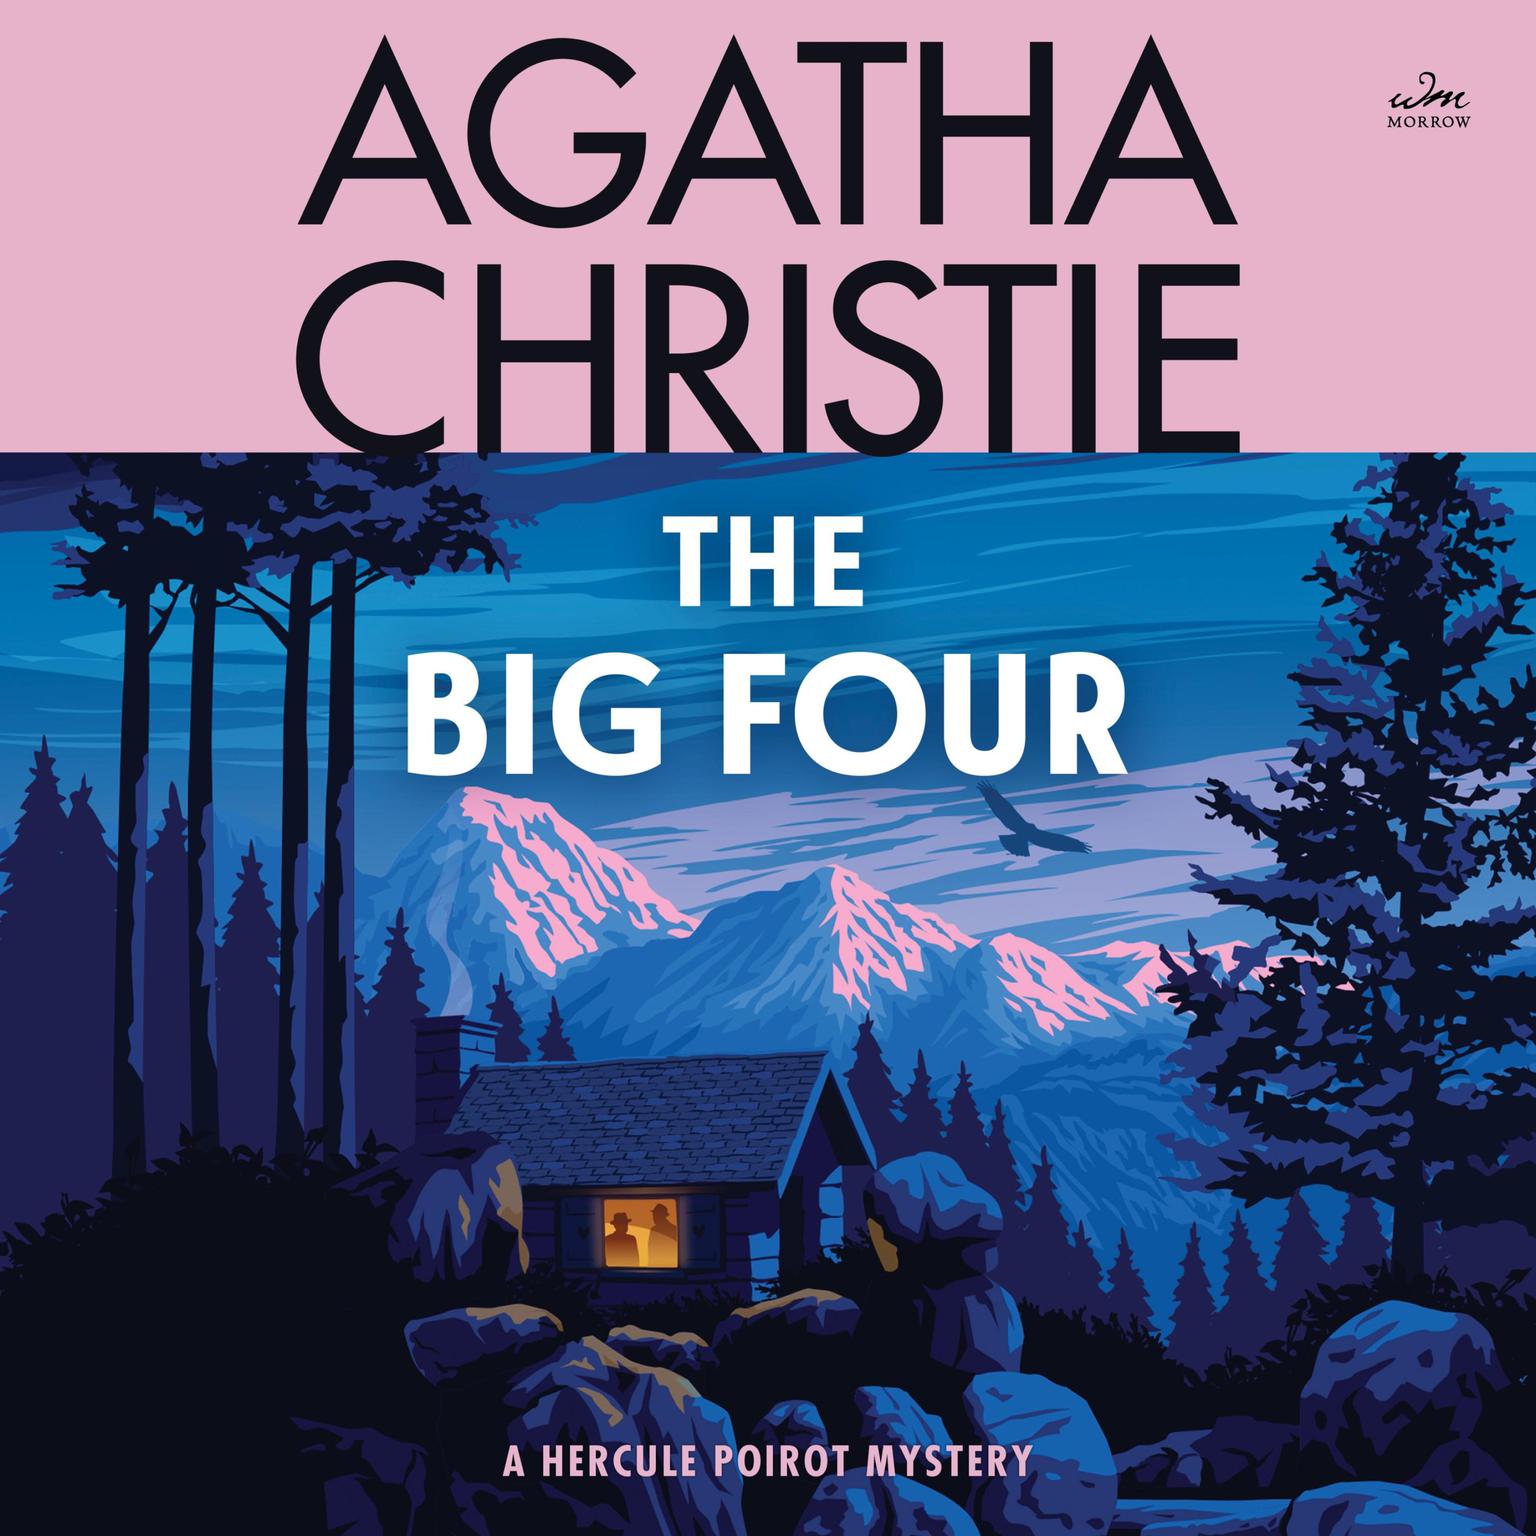 The Big Four: A Hercule Poirot Mystery Audiobook, by Agatha Christie